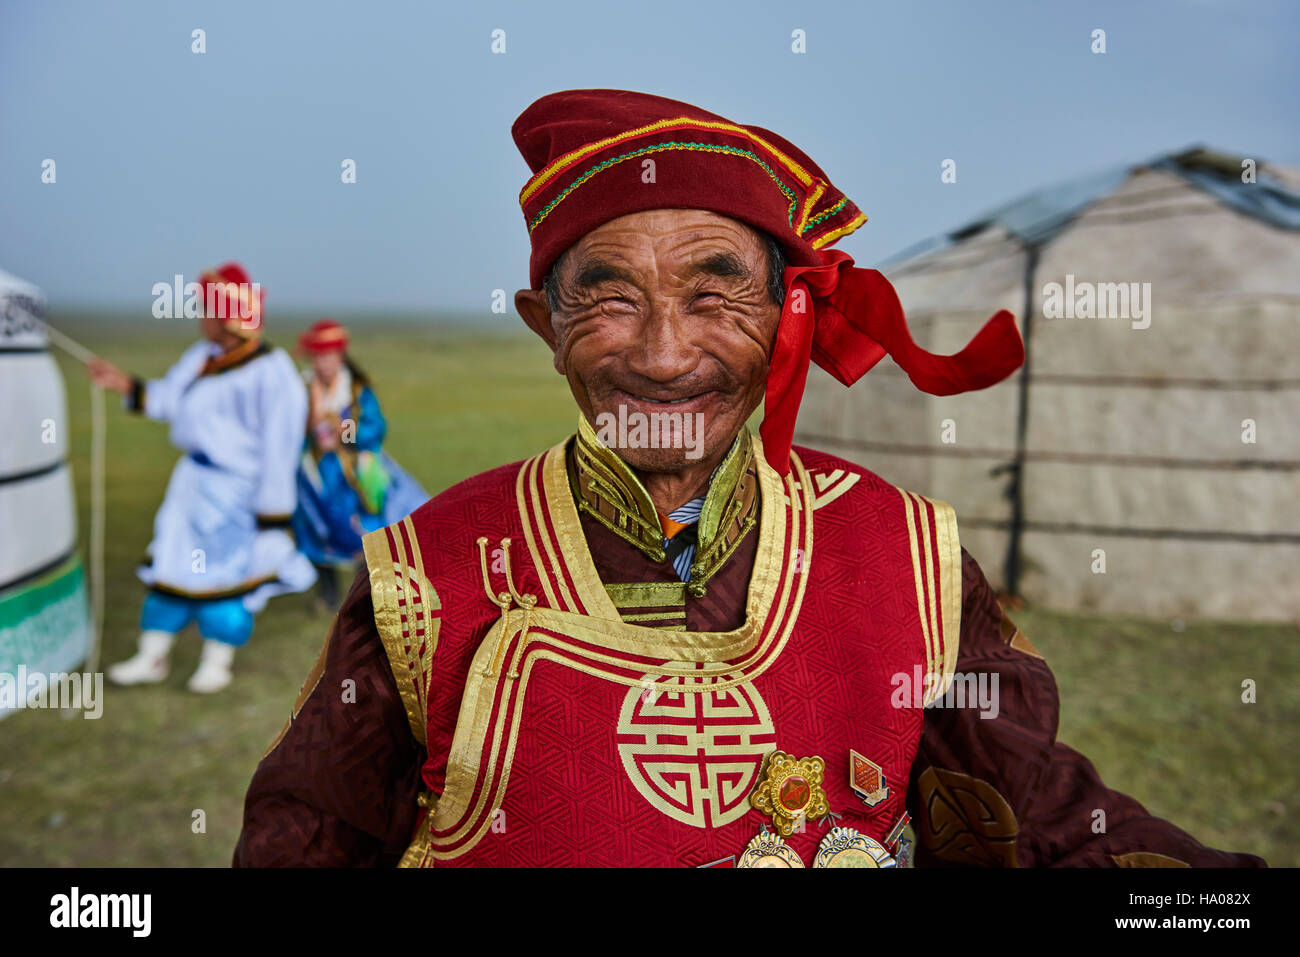 Mongolia, Uvs province, western Mongolia, nomad wedding in the steppe, portrait of an old man from Dorvod ethnic group Stock Photo